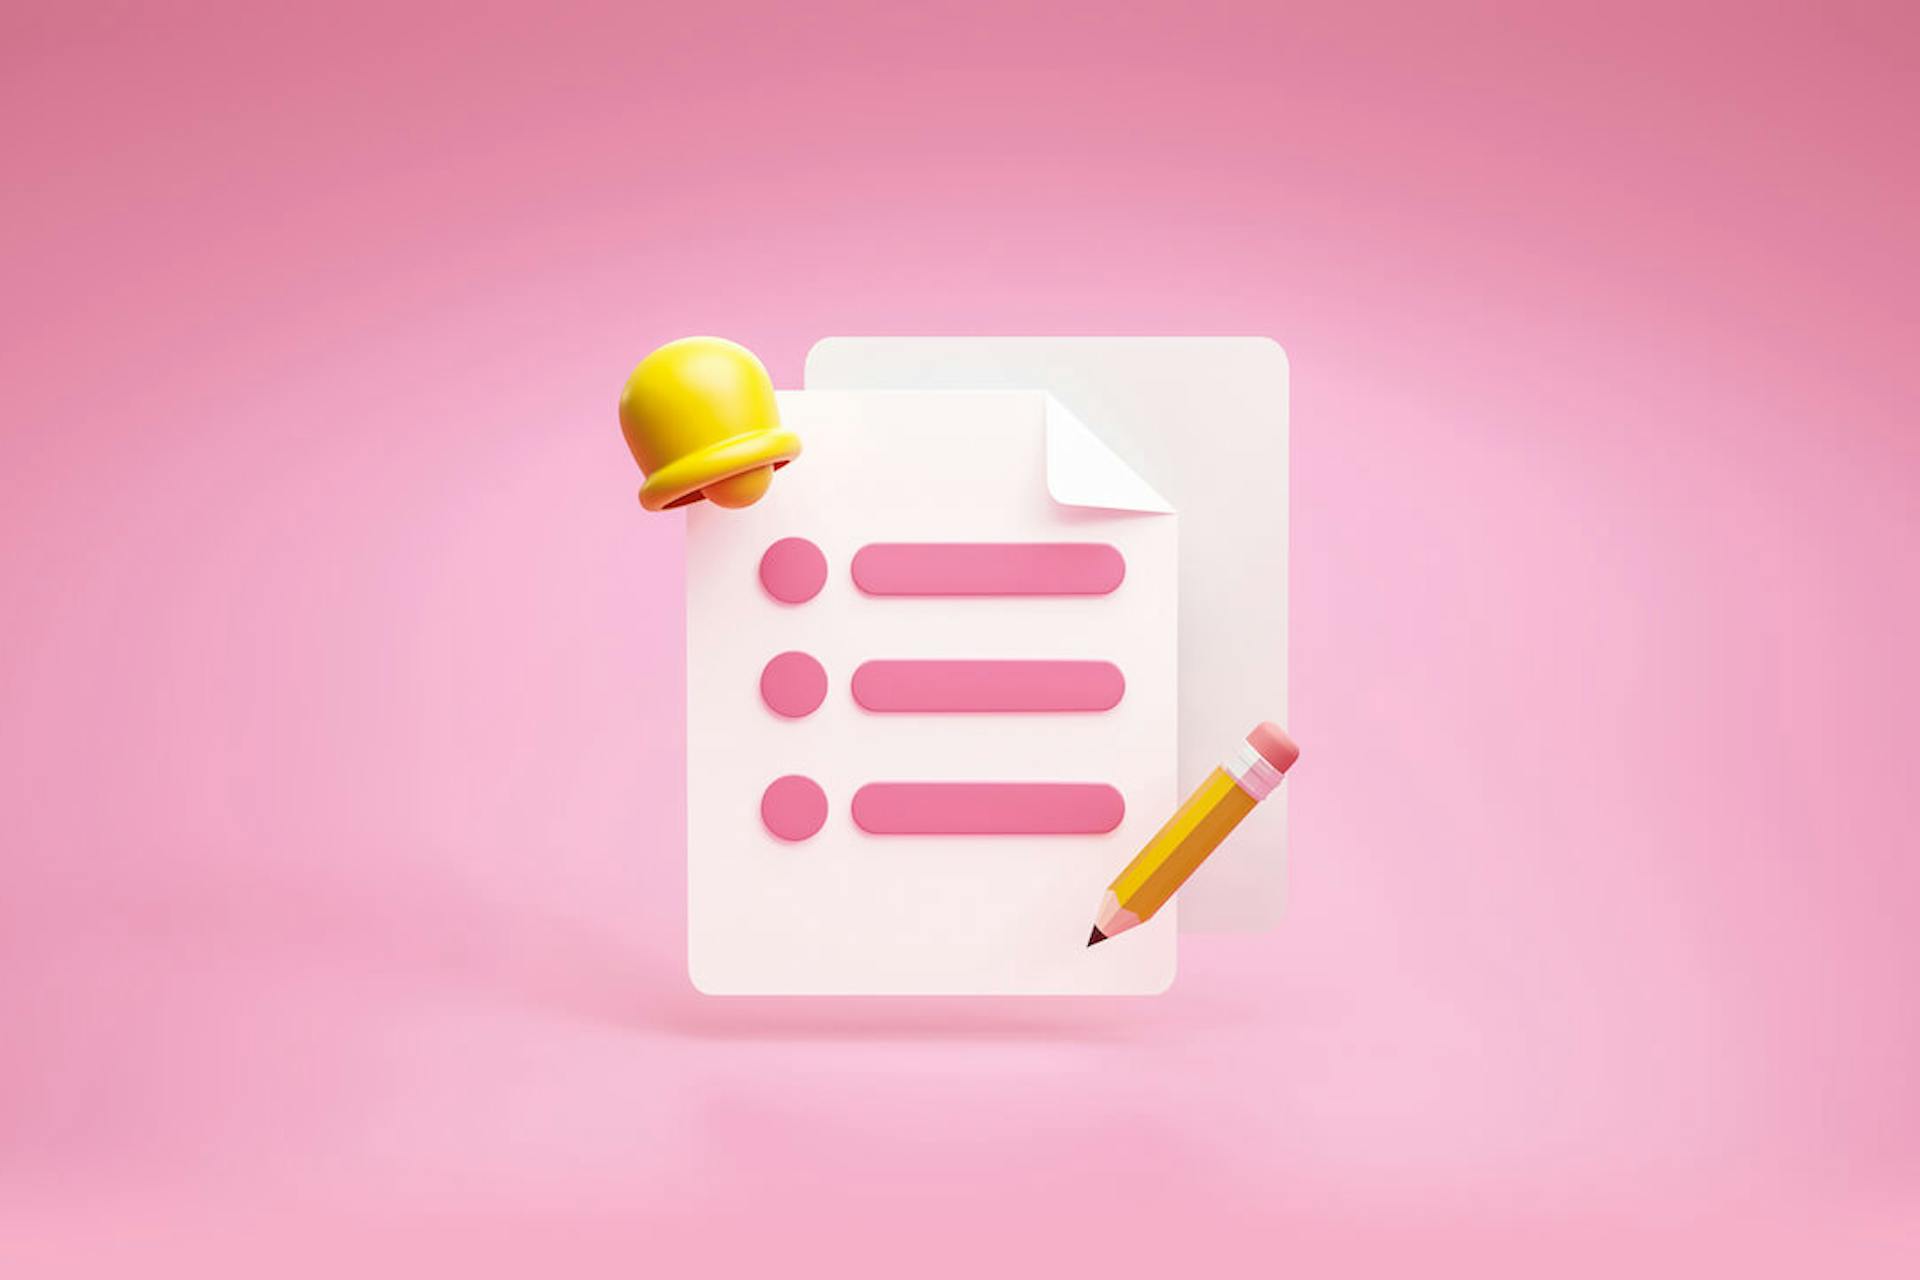 Illustration of a checklist in front of a pink background